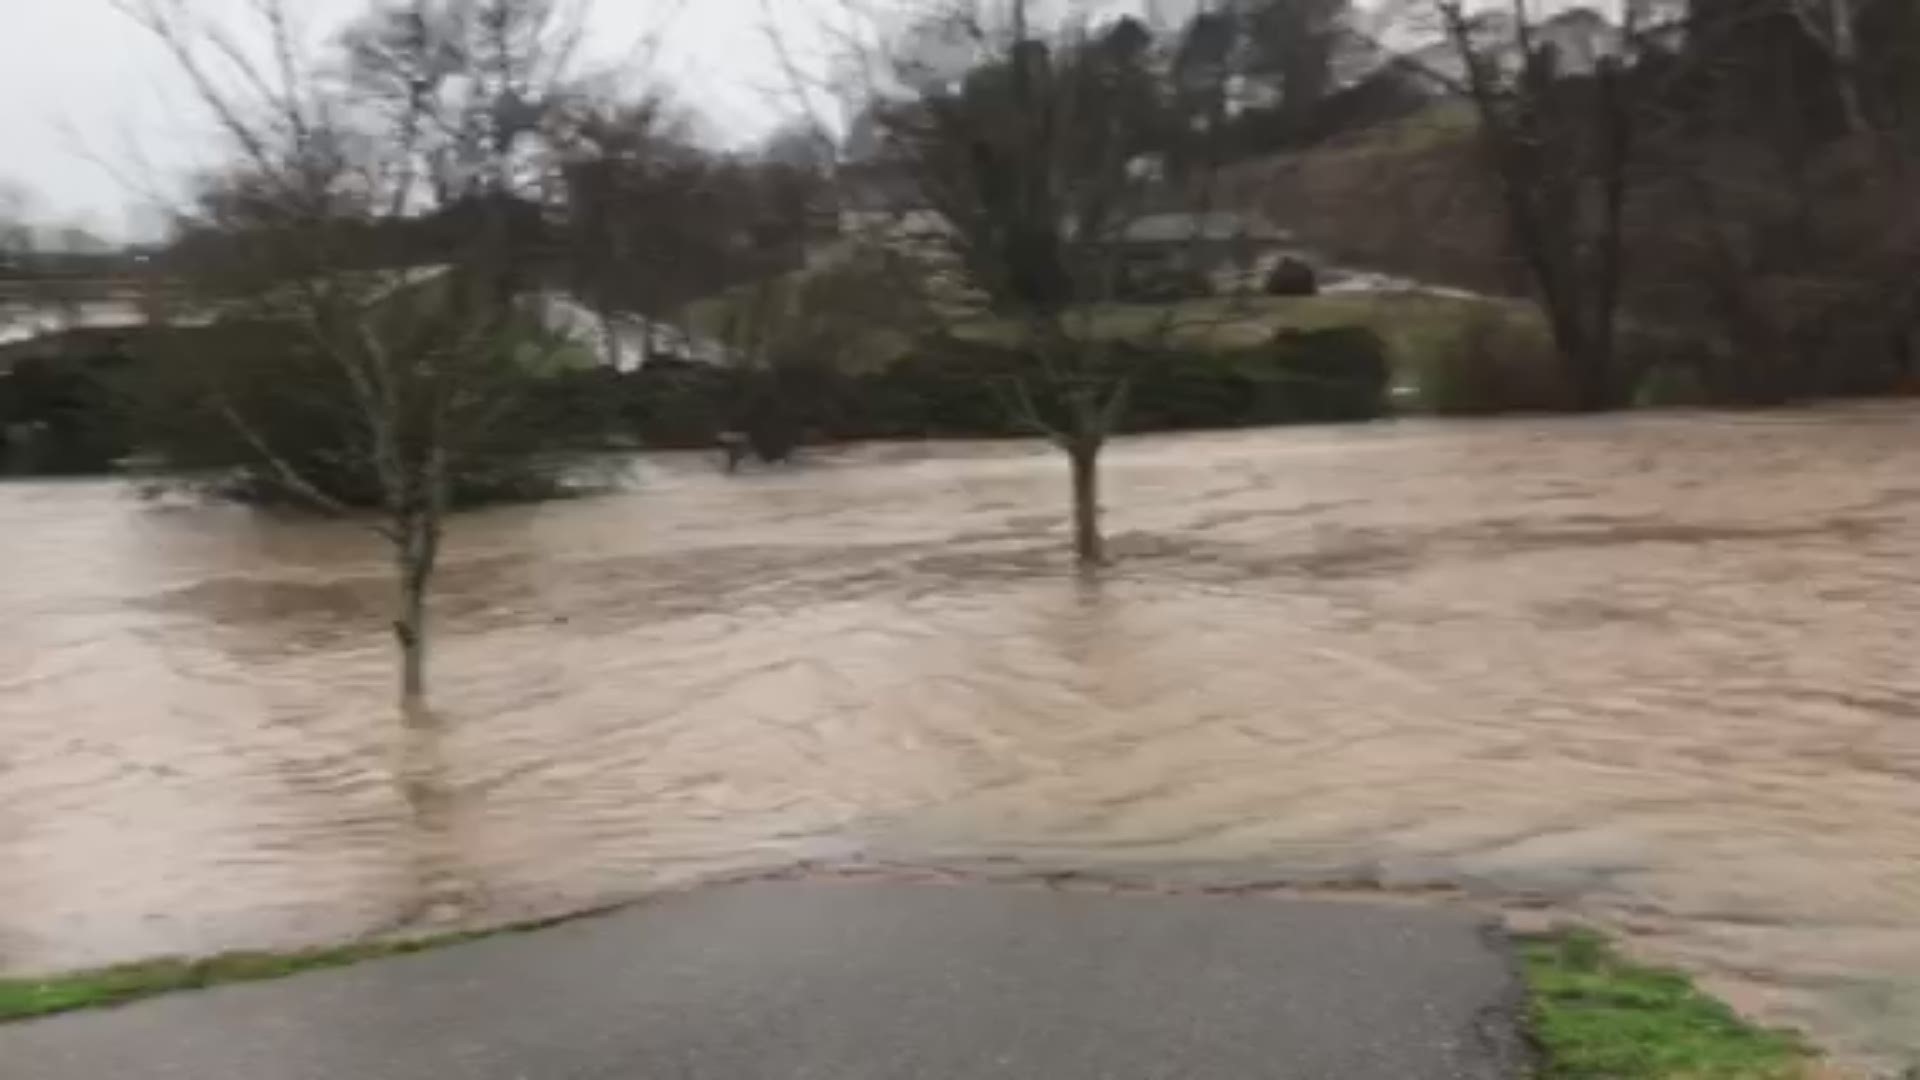 Branson Self shared this video of high water at the Greenbelt Park in Maryville on Thursday morning, Feb. 6, after heavy rains.